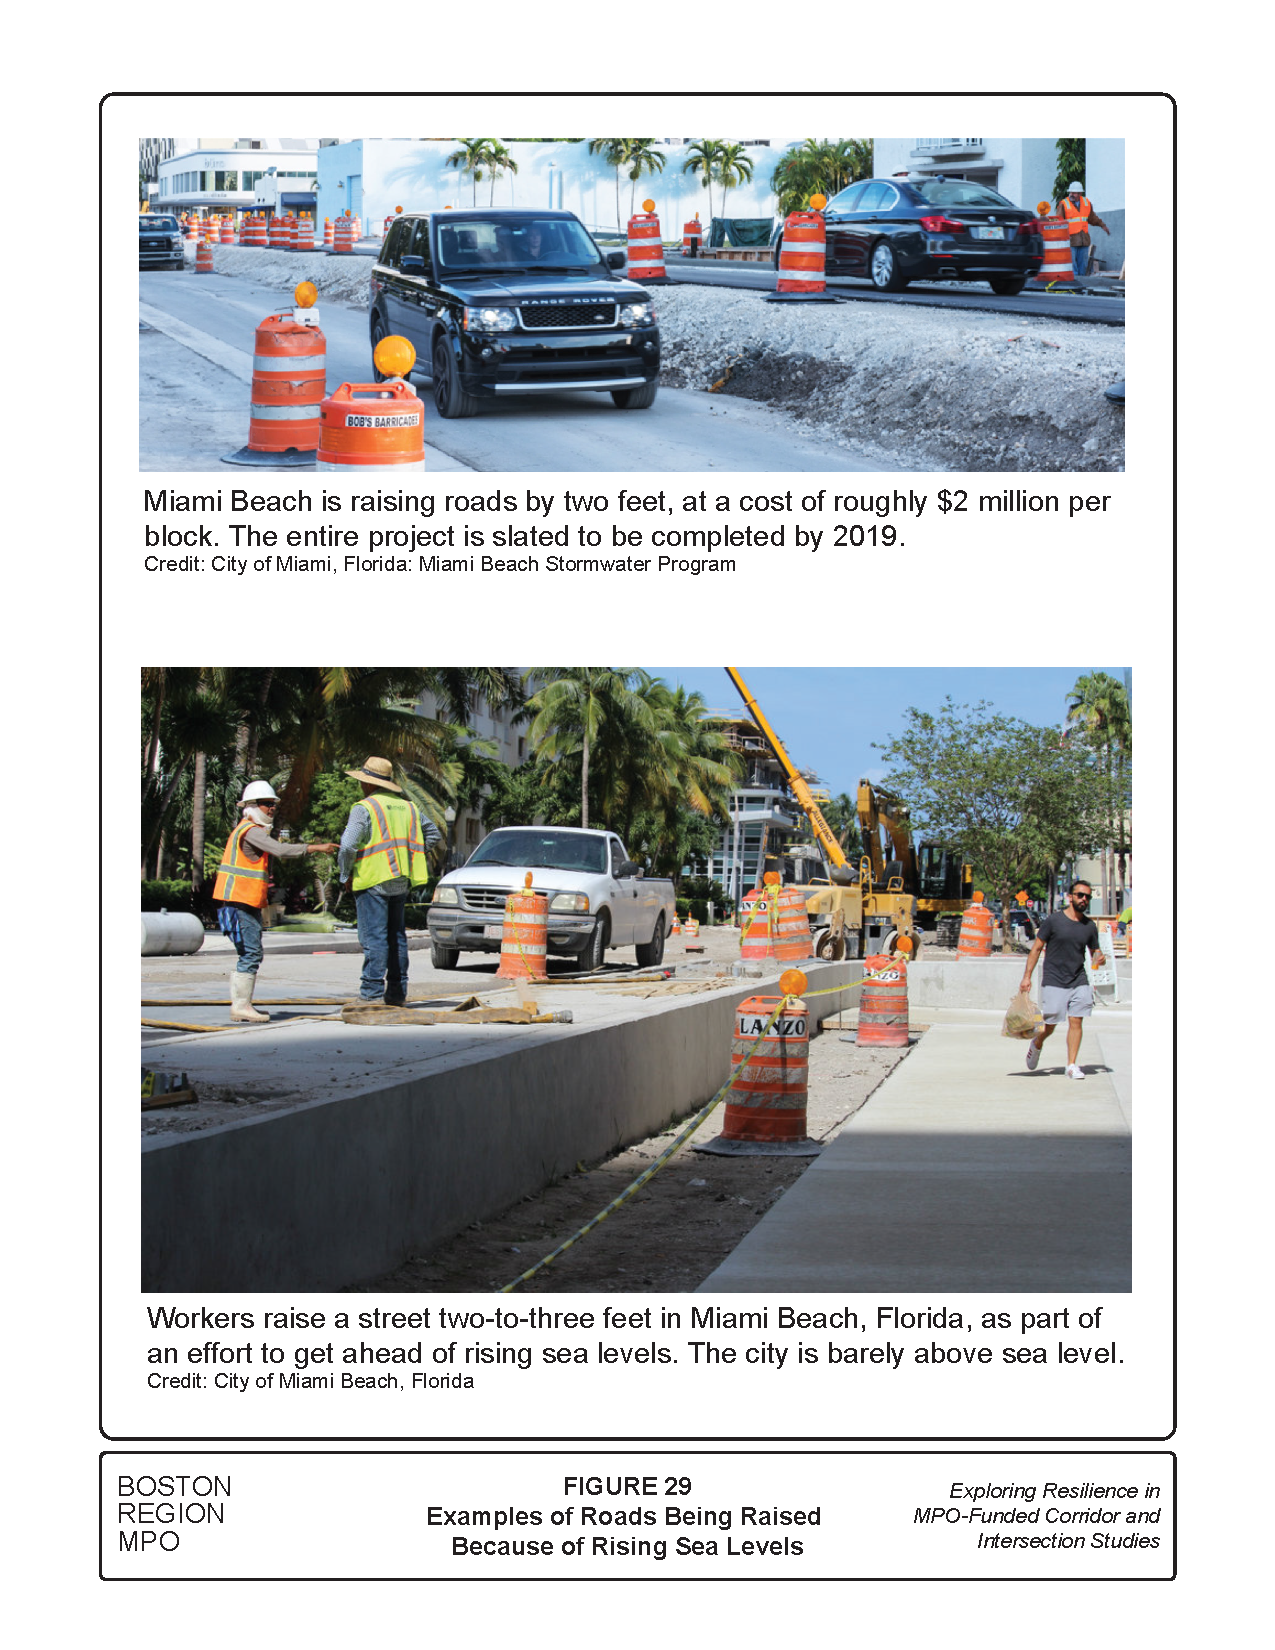 Figure 29 shows examples of locations where roads are being elevated because of rising sea levels.